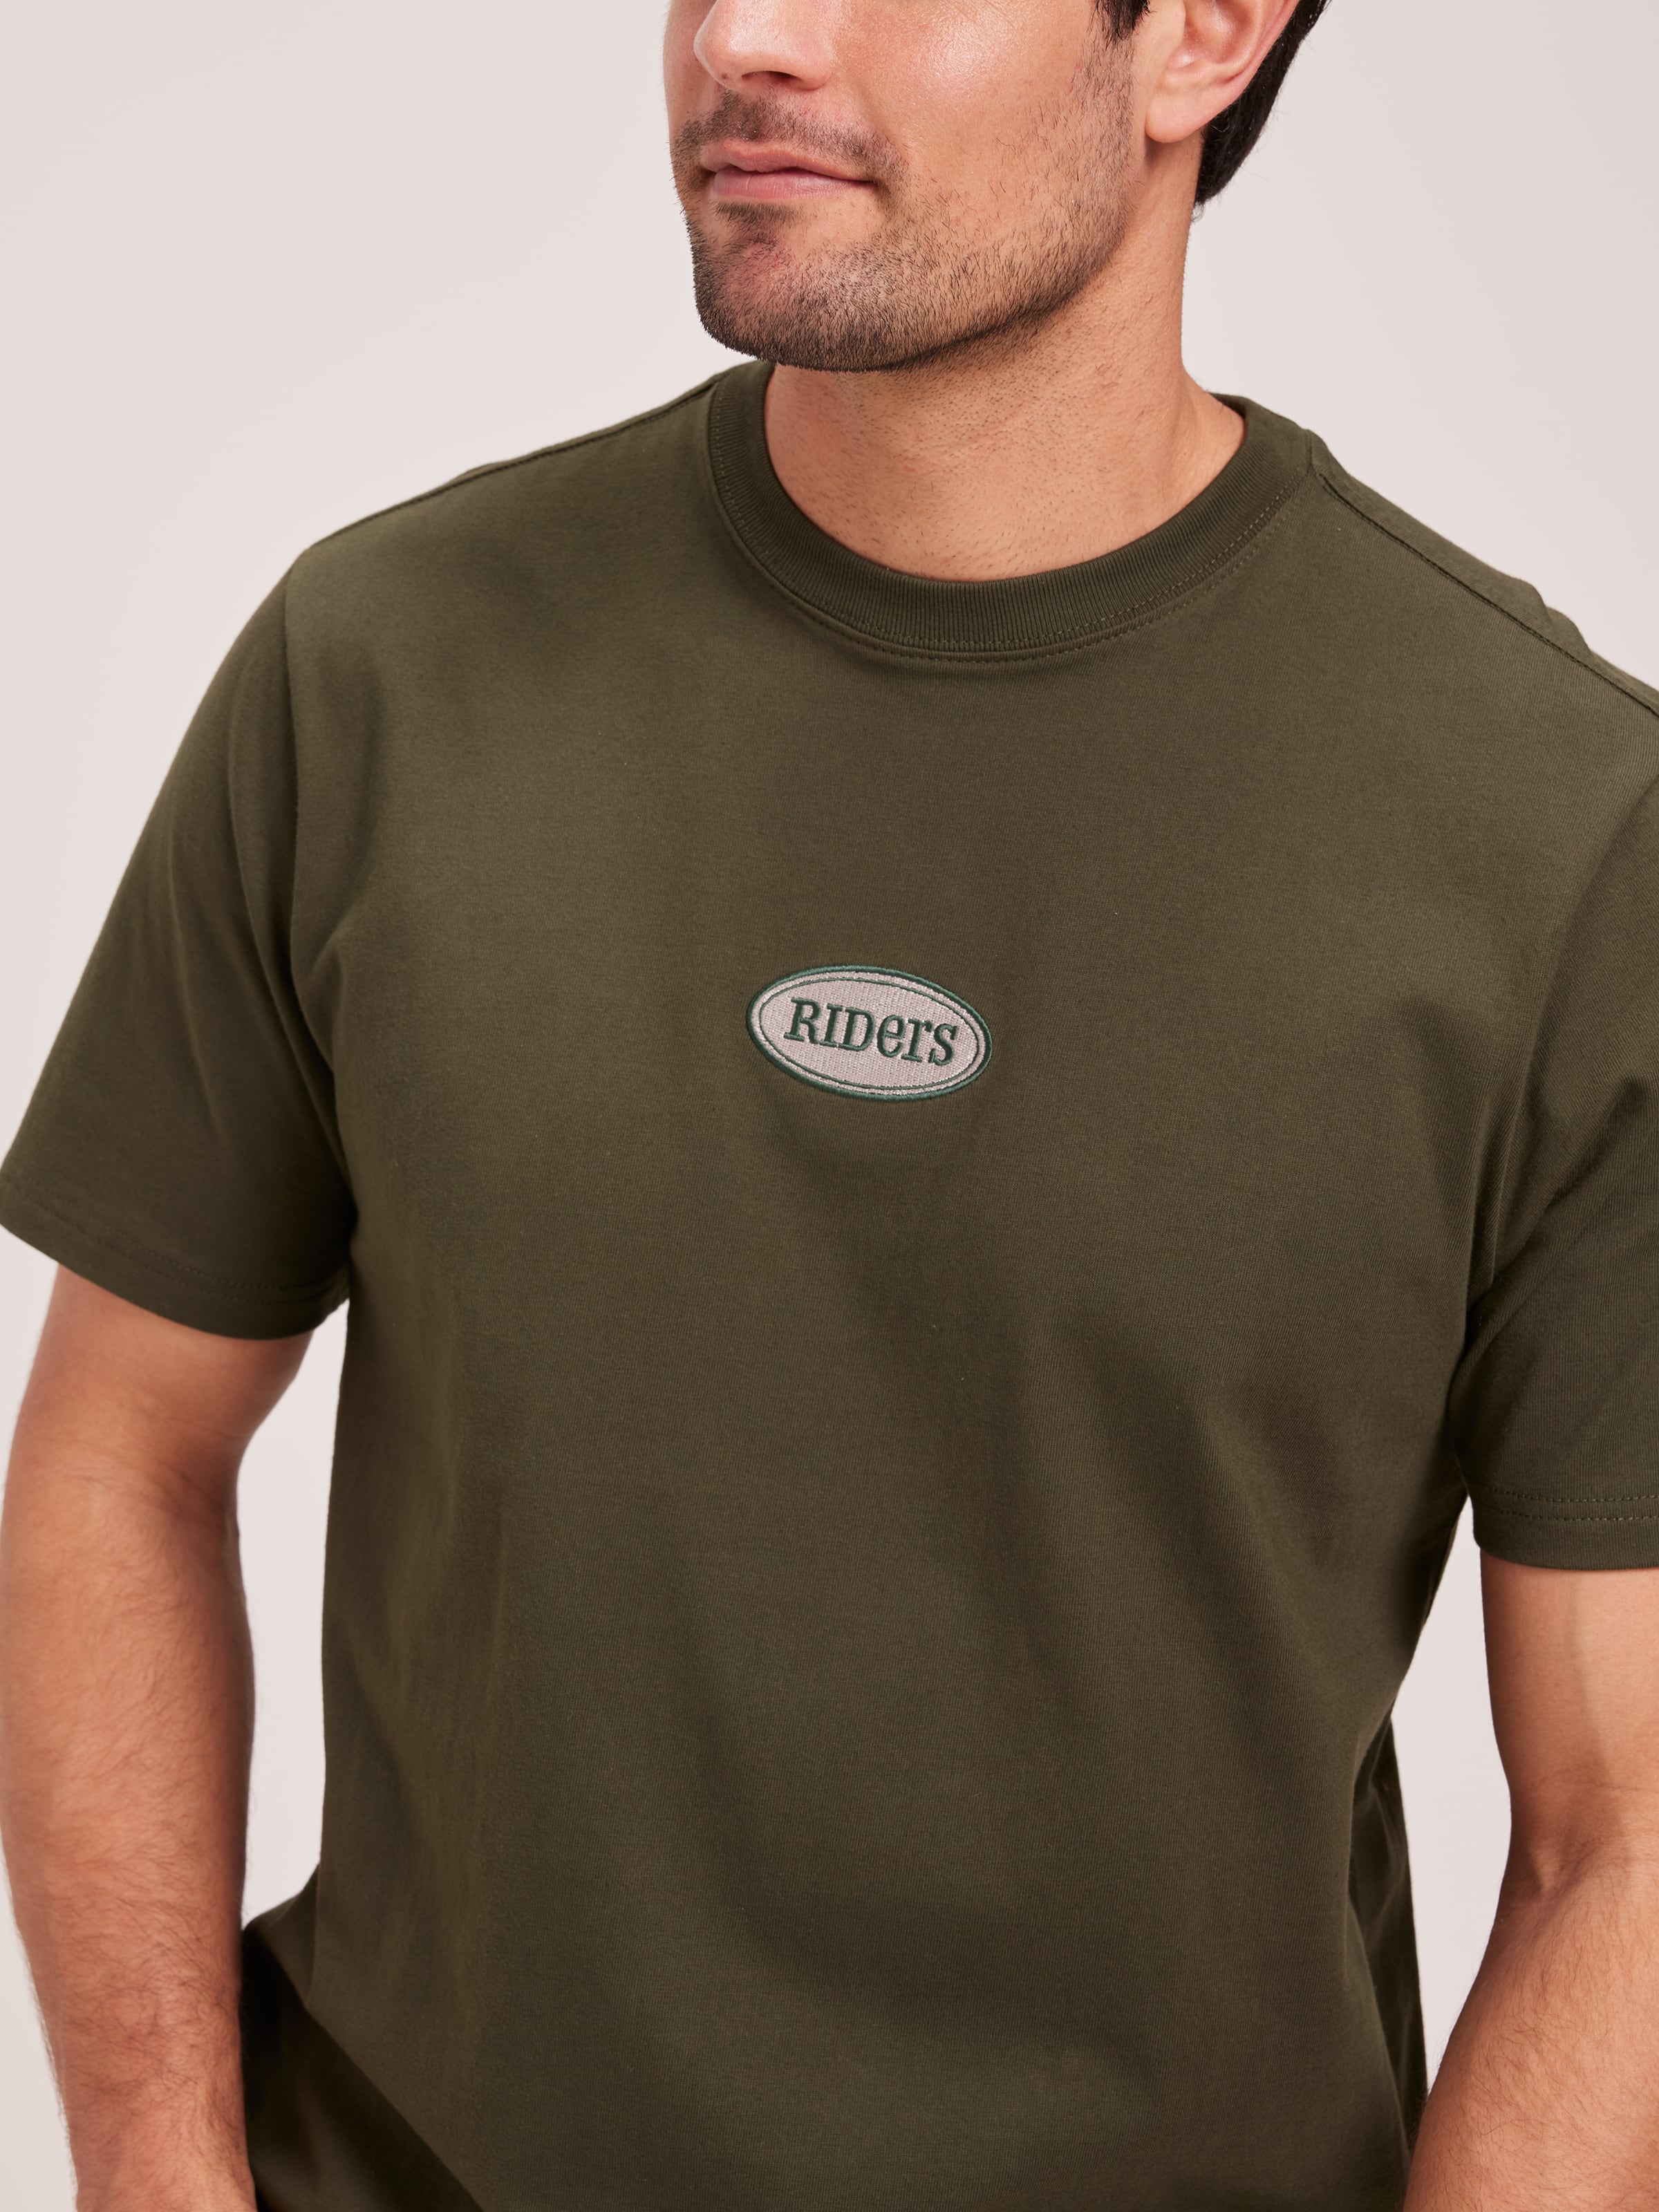 Oval Tee In Army Duffle